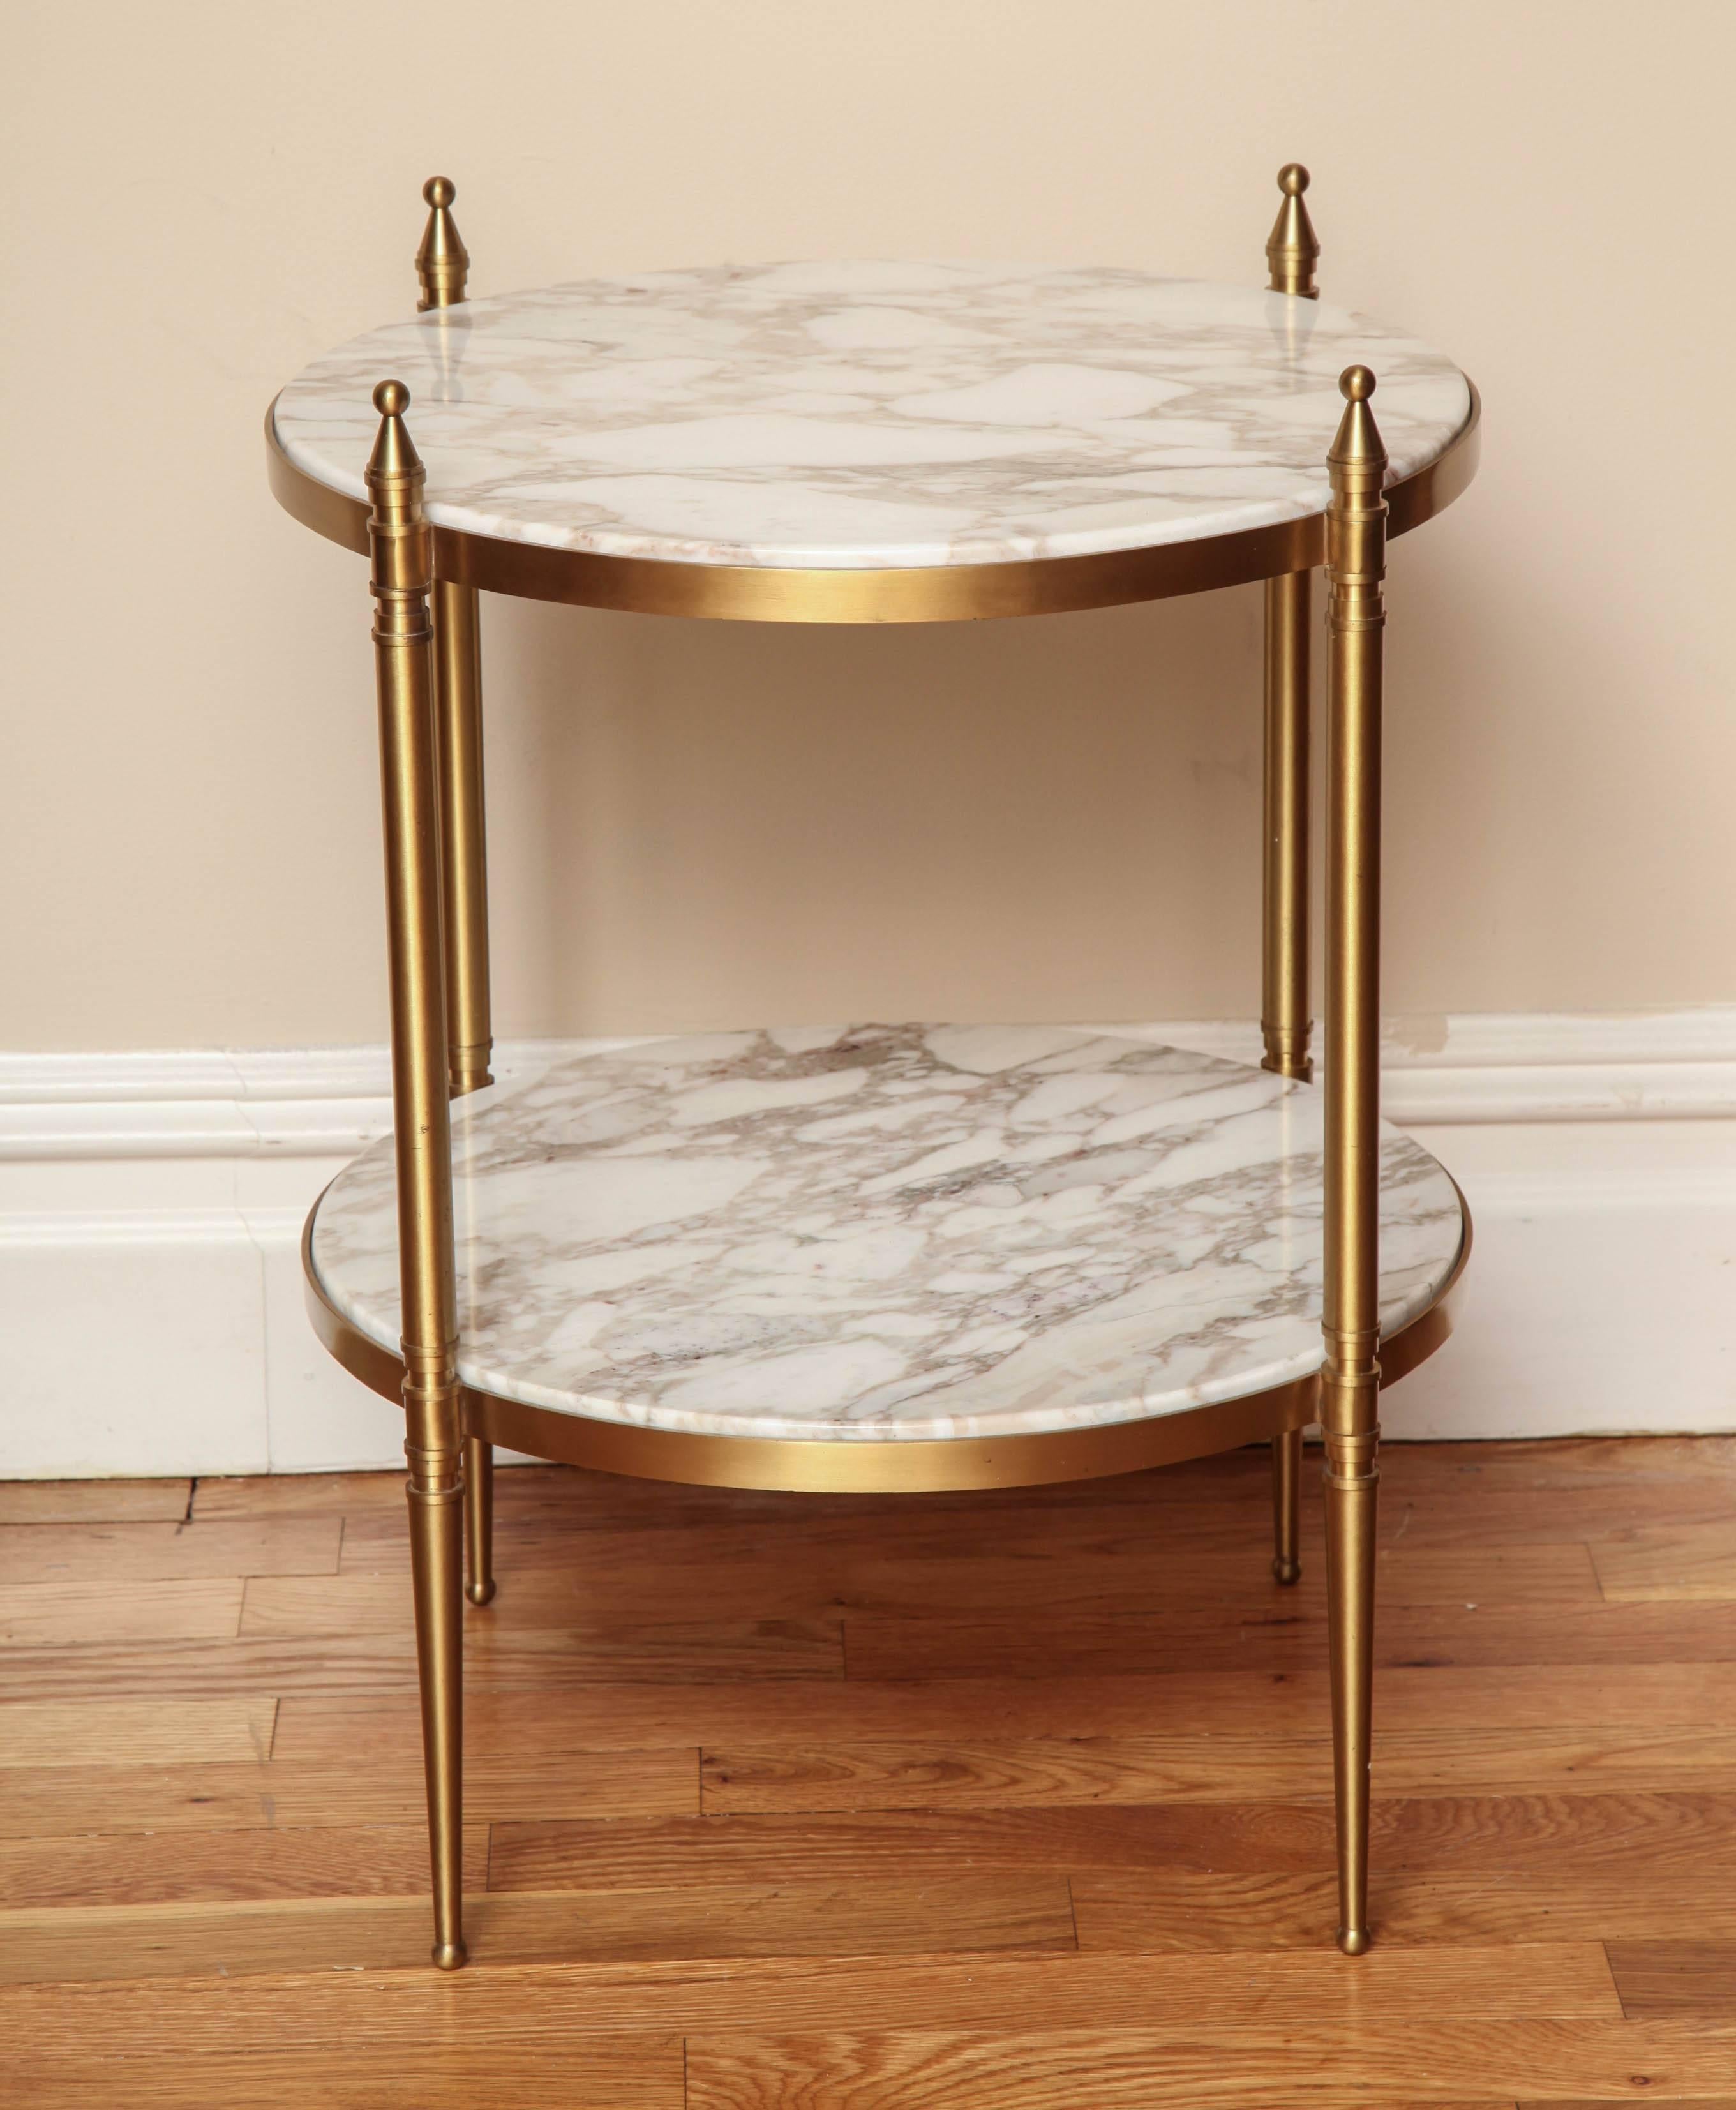 A round 2-tiered side table with marble surfaces inset in bronze frame and gold finials. The 2 surfaces are joined and supported by 4 round  legs tapering to ball point and ball shaped finials. Circa 1970.